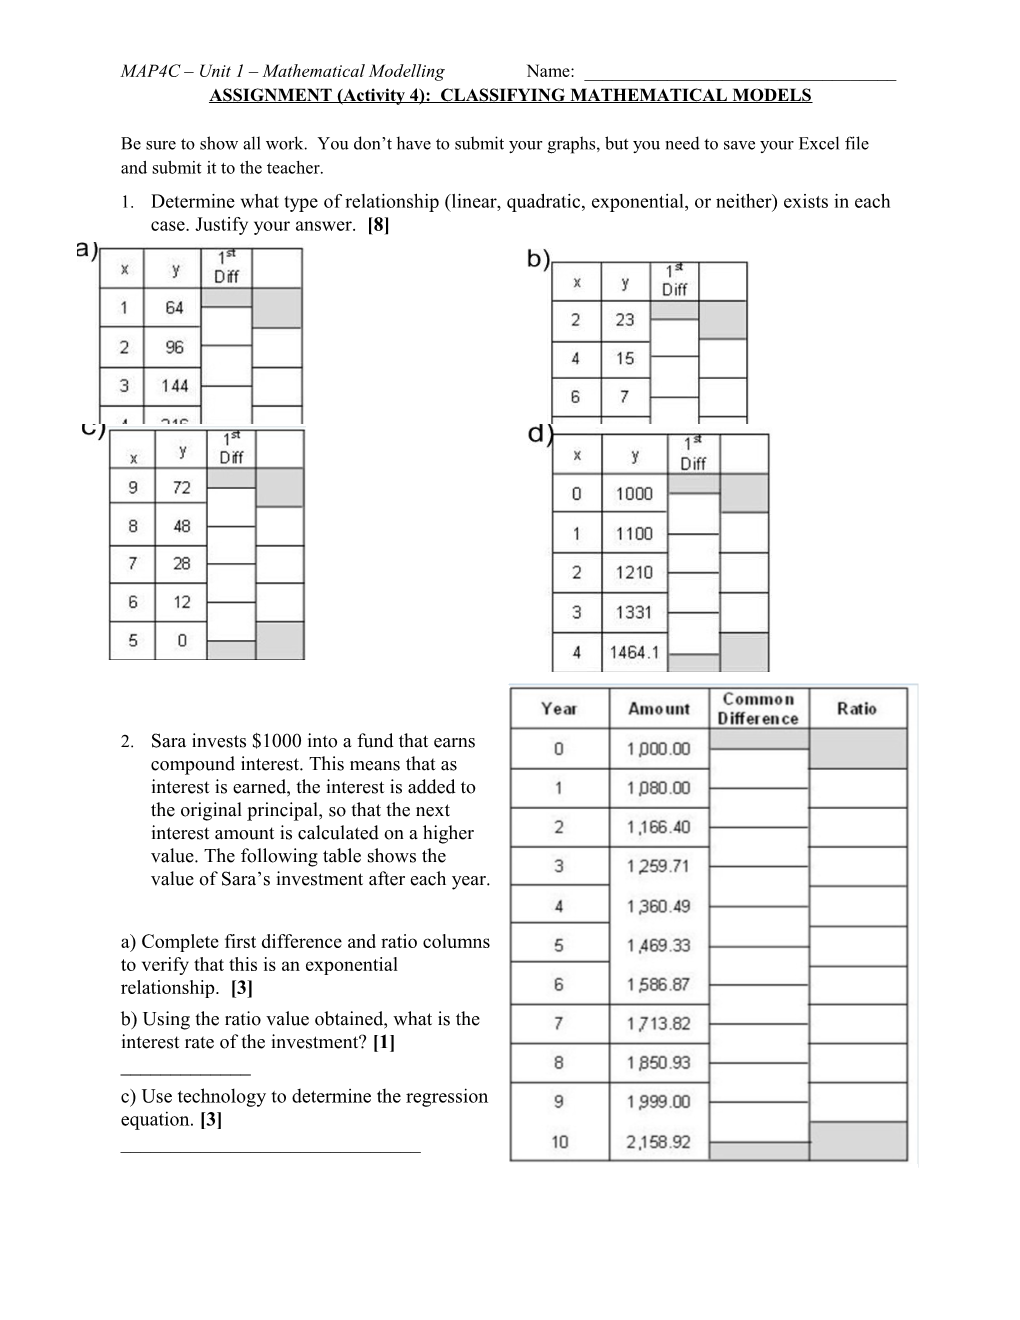 ASSIGNMENT (Activity 4): CLASSIFYING MATHEMATICAL MODELS